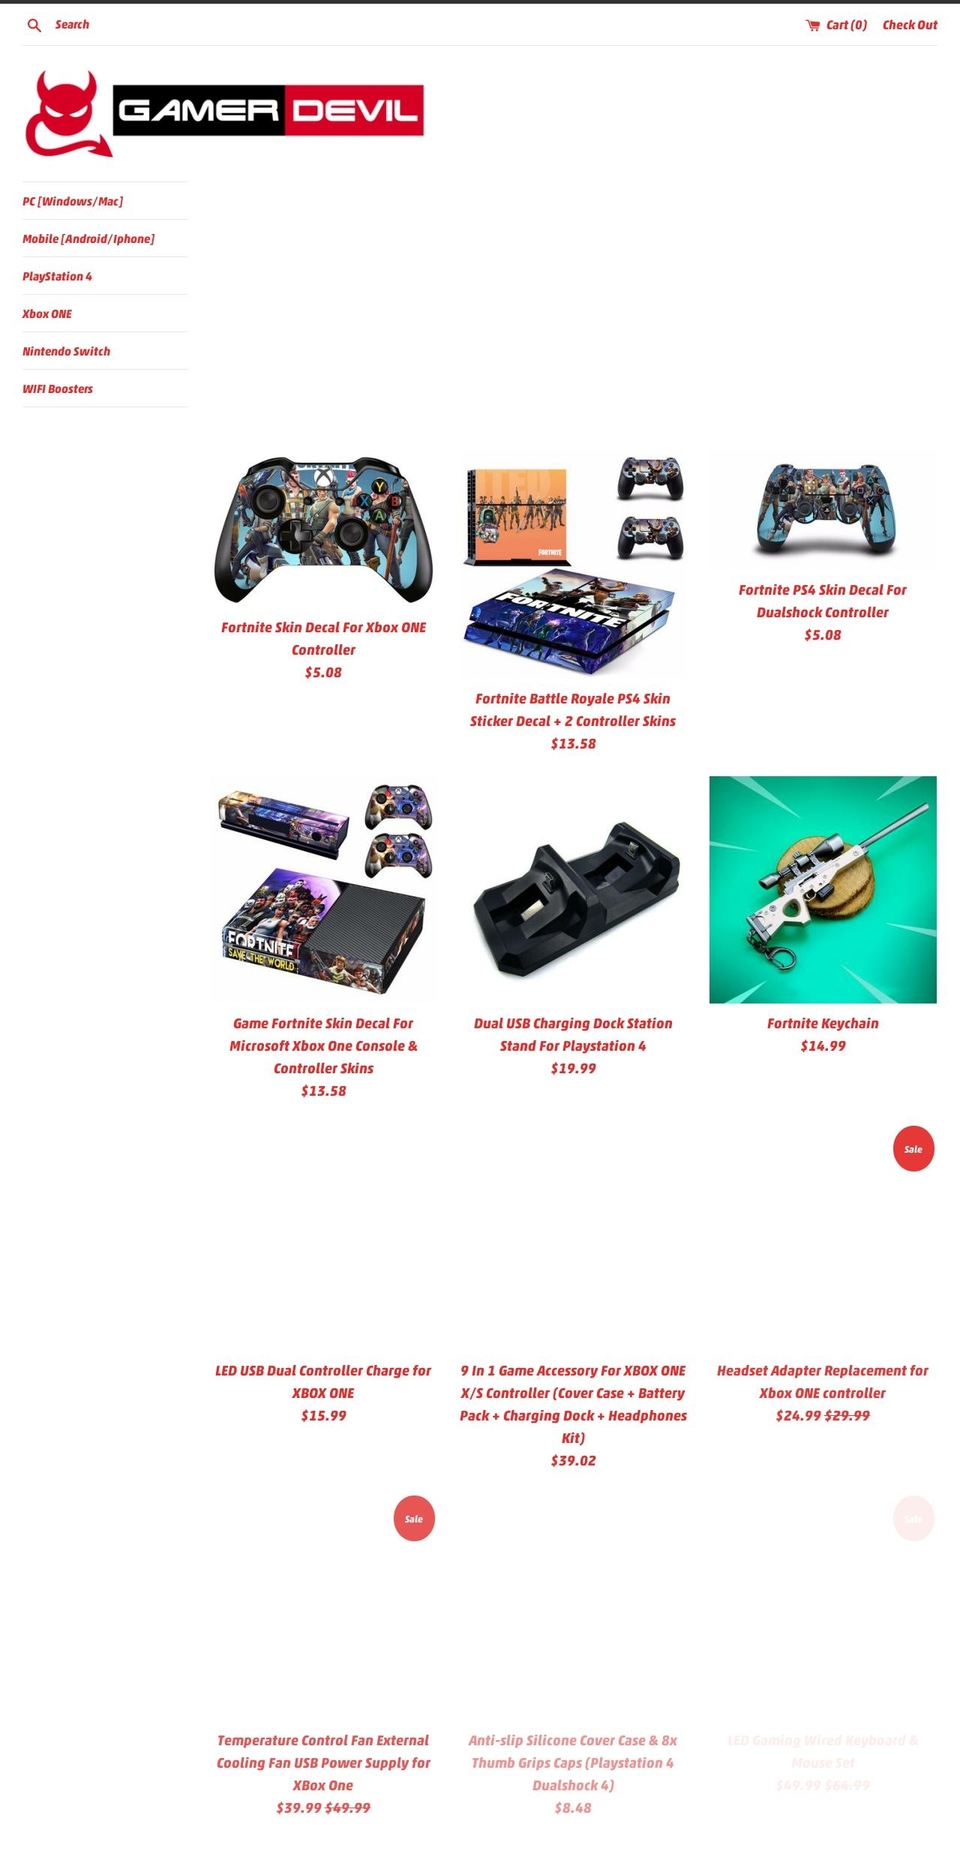 NEW Shopify theme site example gamerdevil.com